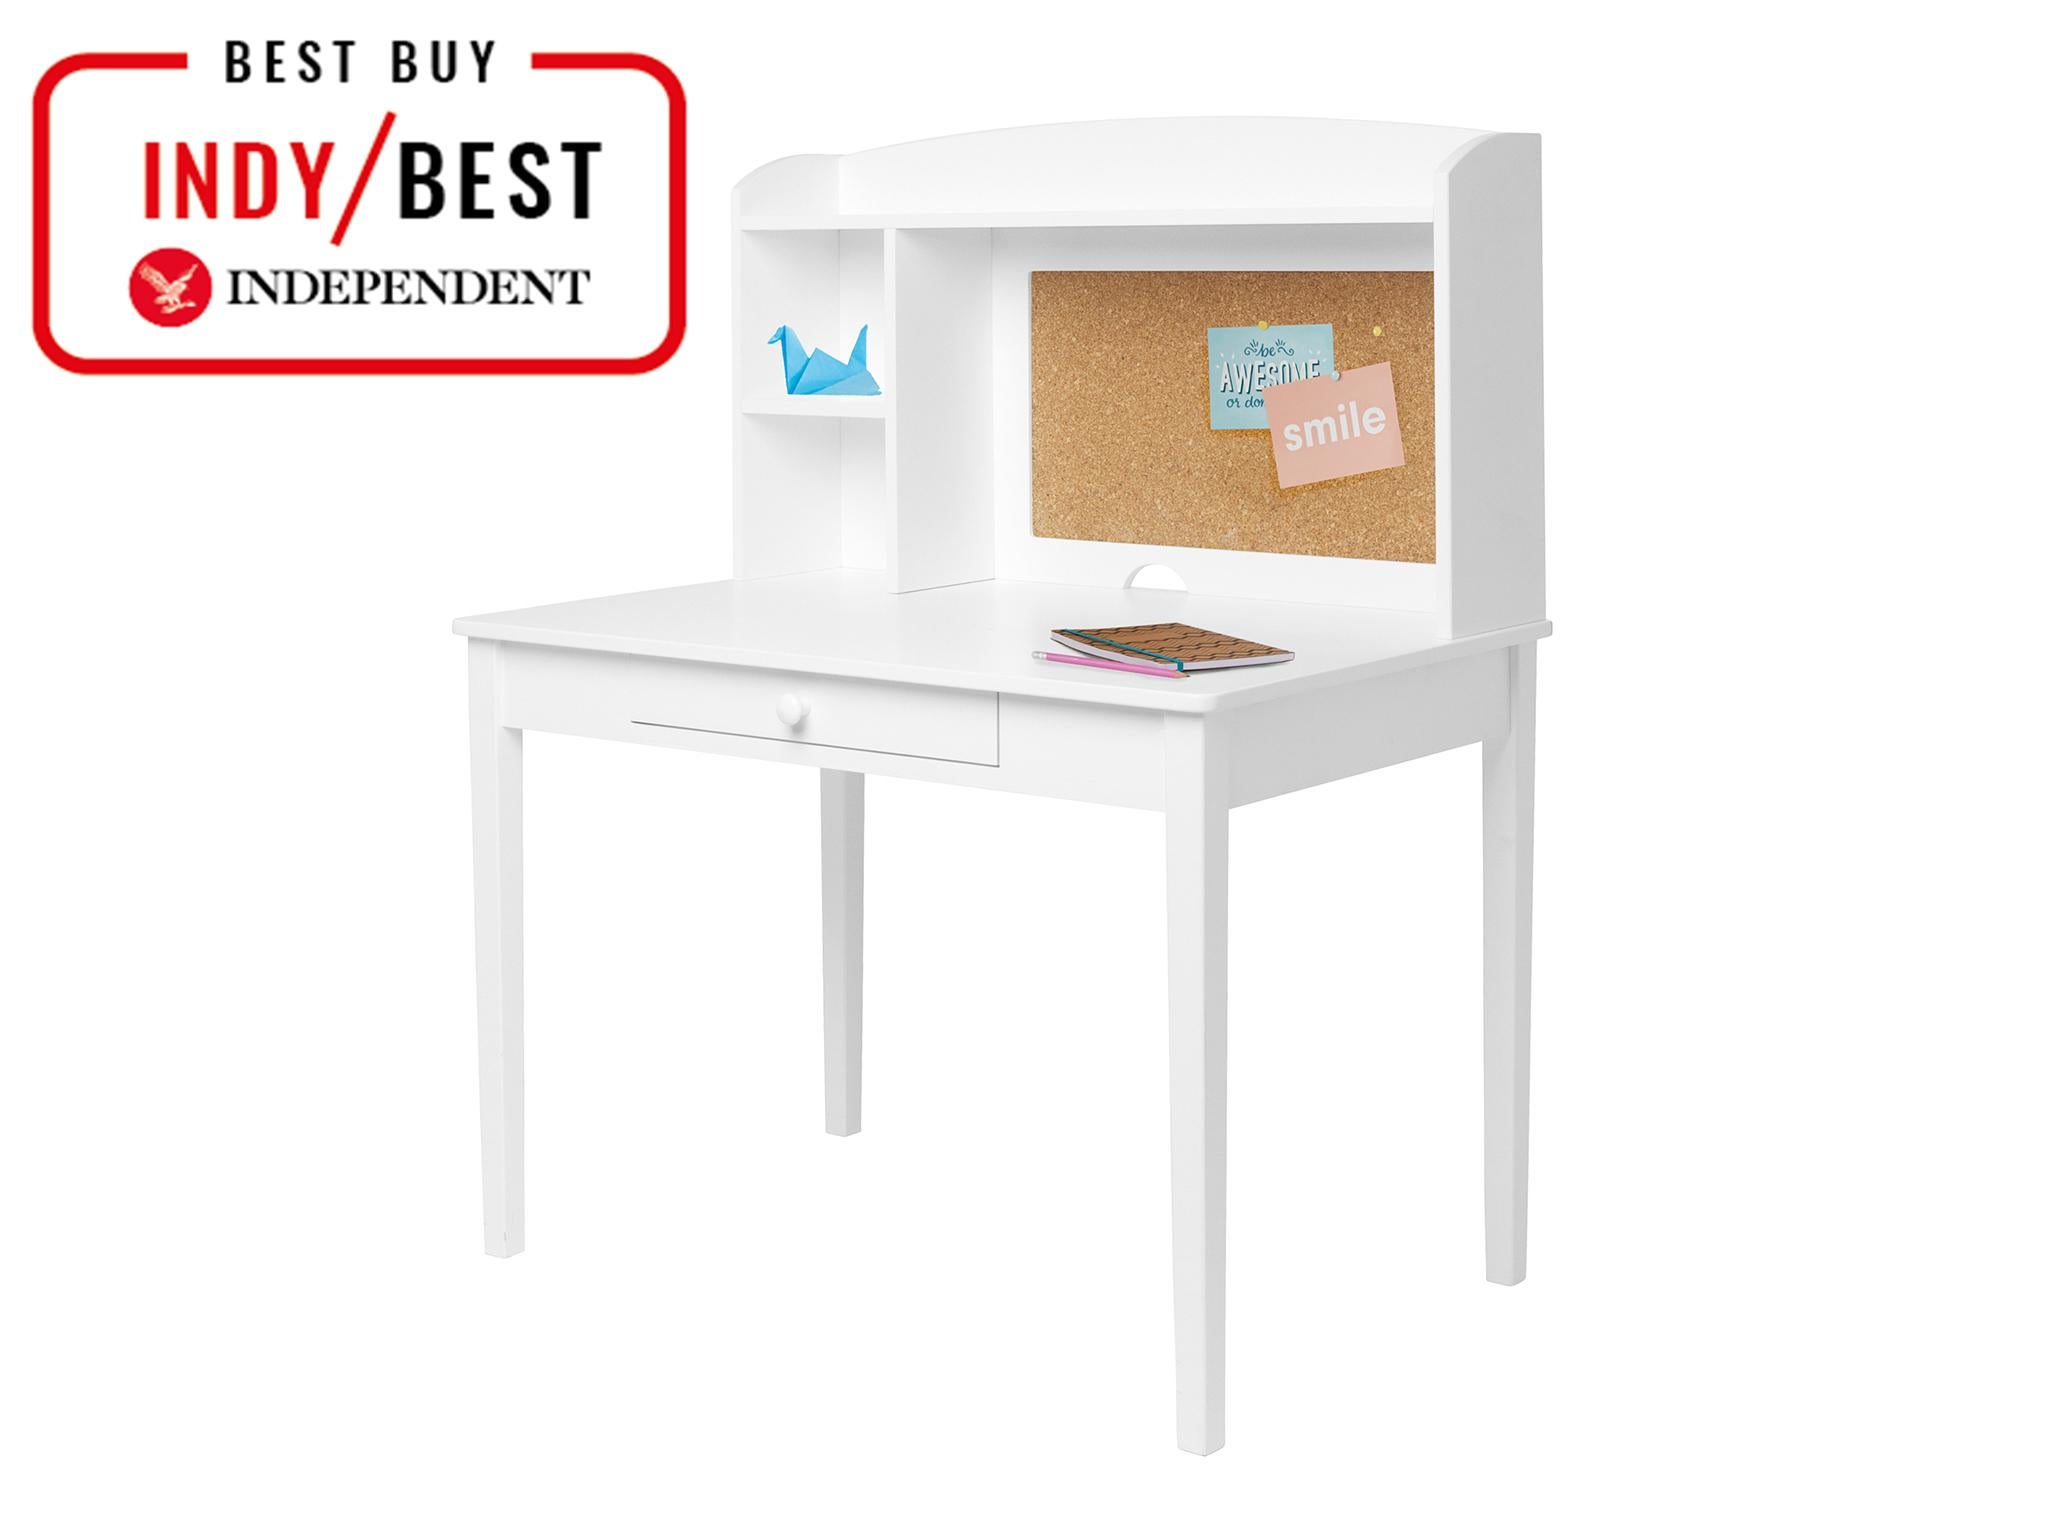 study table chair for 5 year old